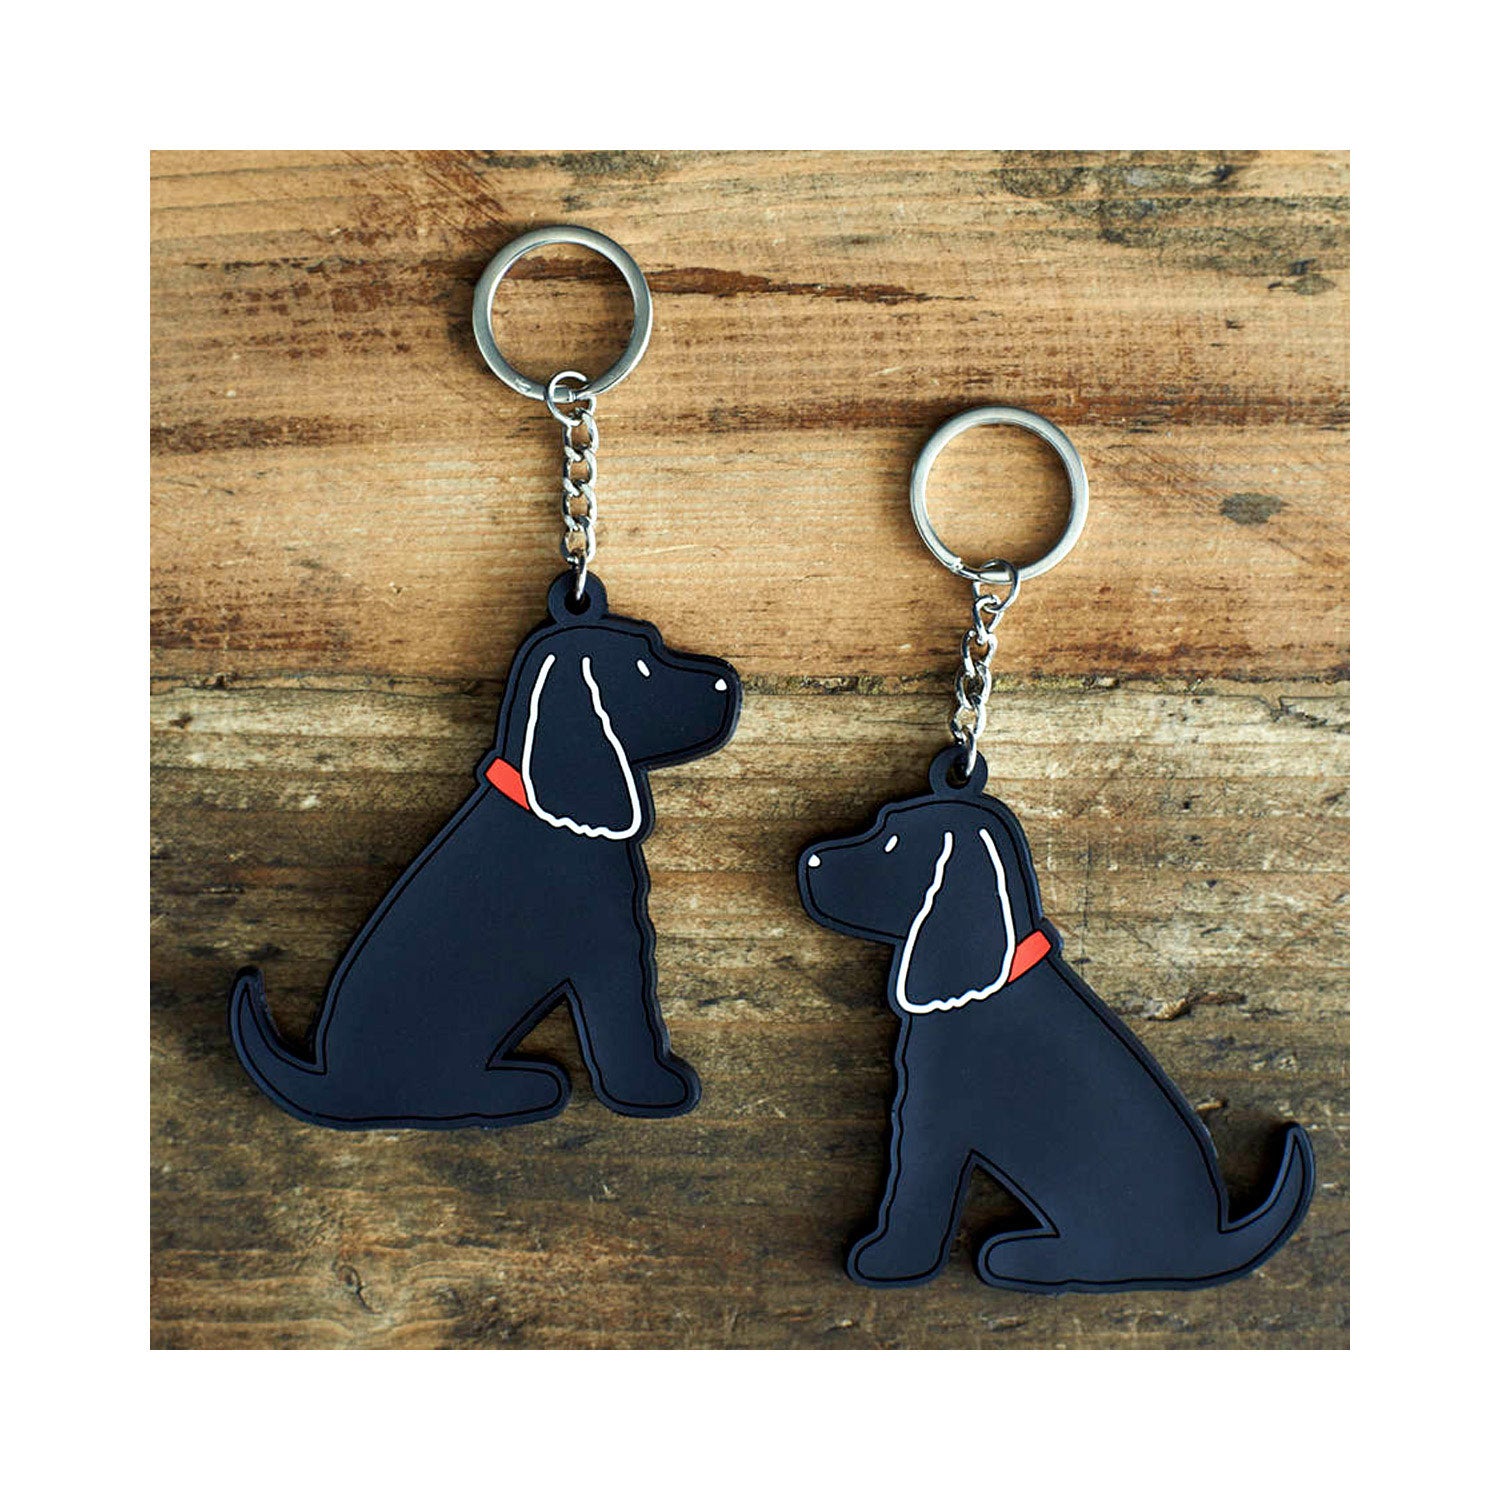 Dog Lover Gifts available at Dog Krazy Gifts  - Hugo The Black Cocker Spaniel Keyring - part of the Sweet William range available from Dog Krazy Gifts